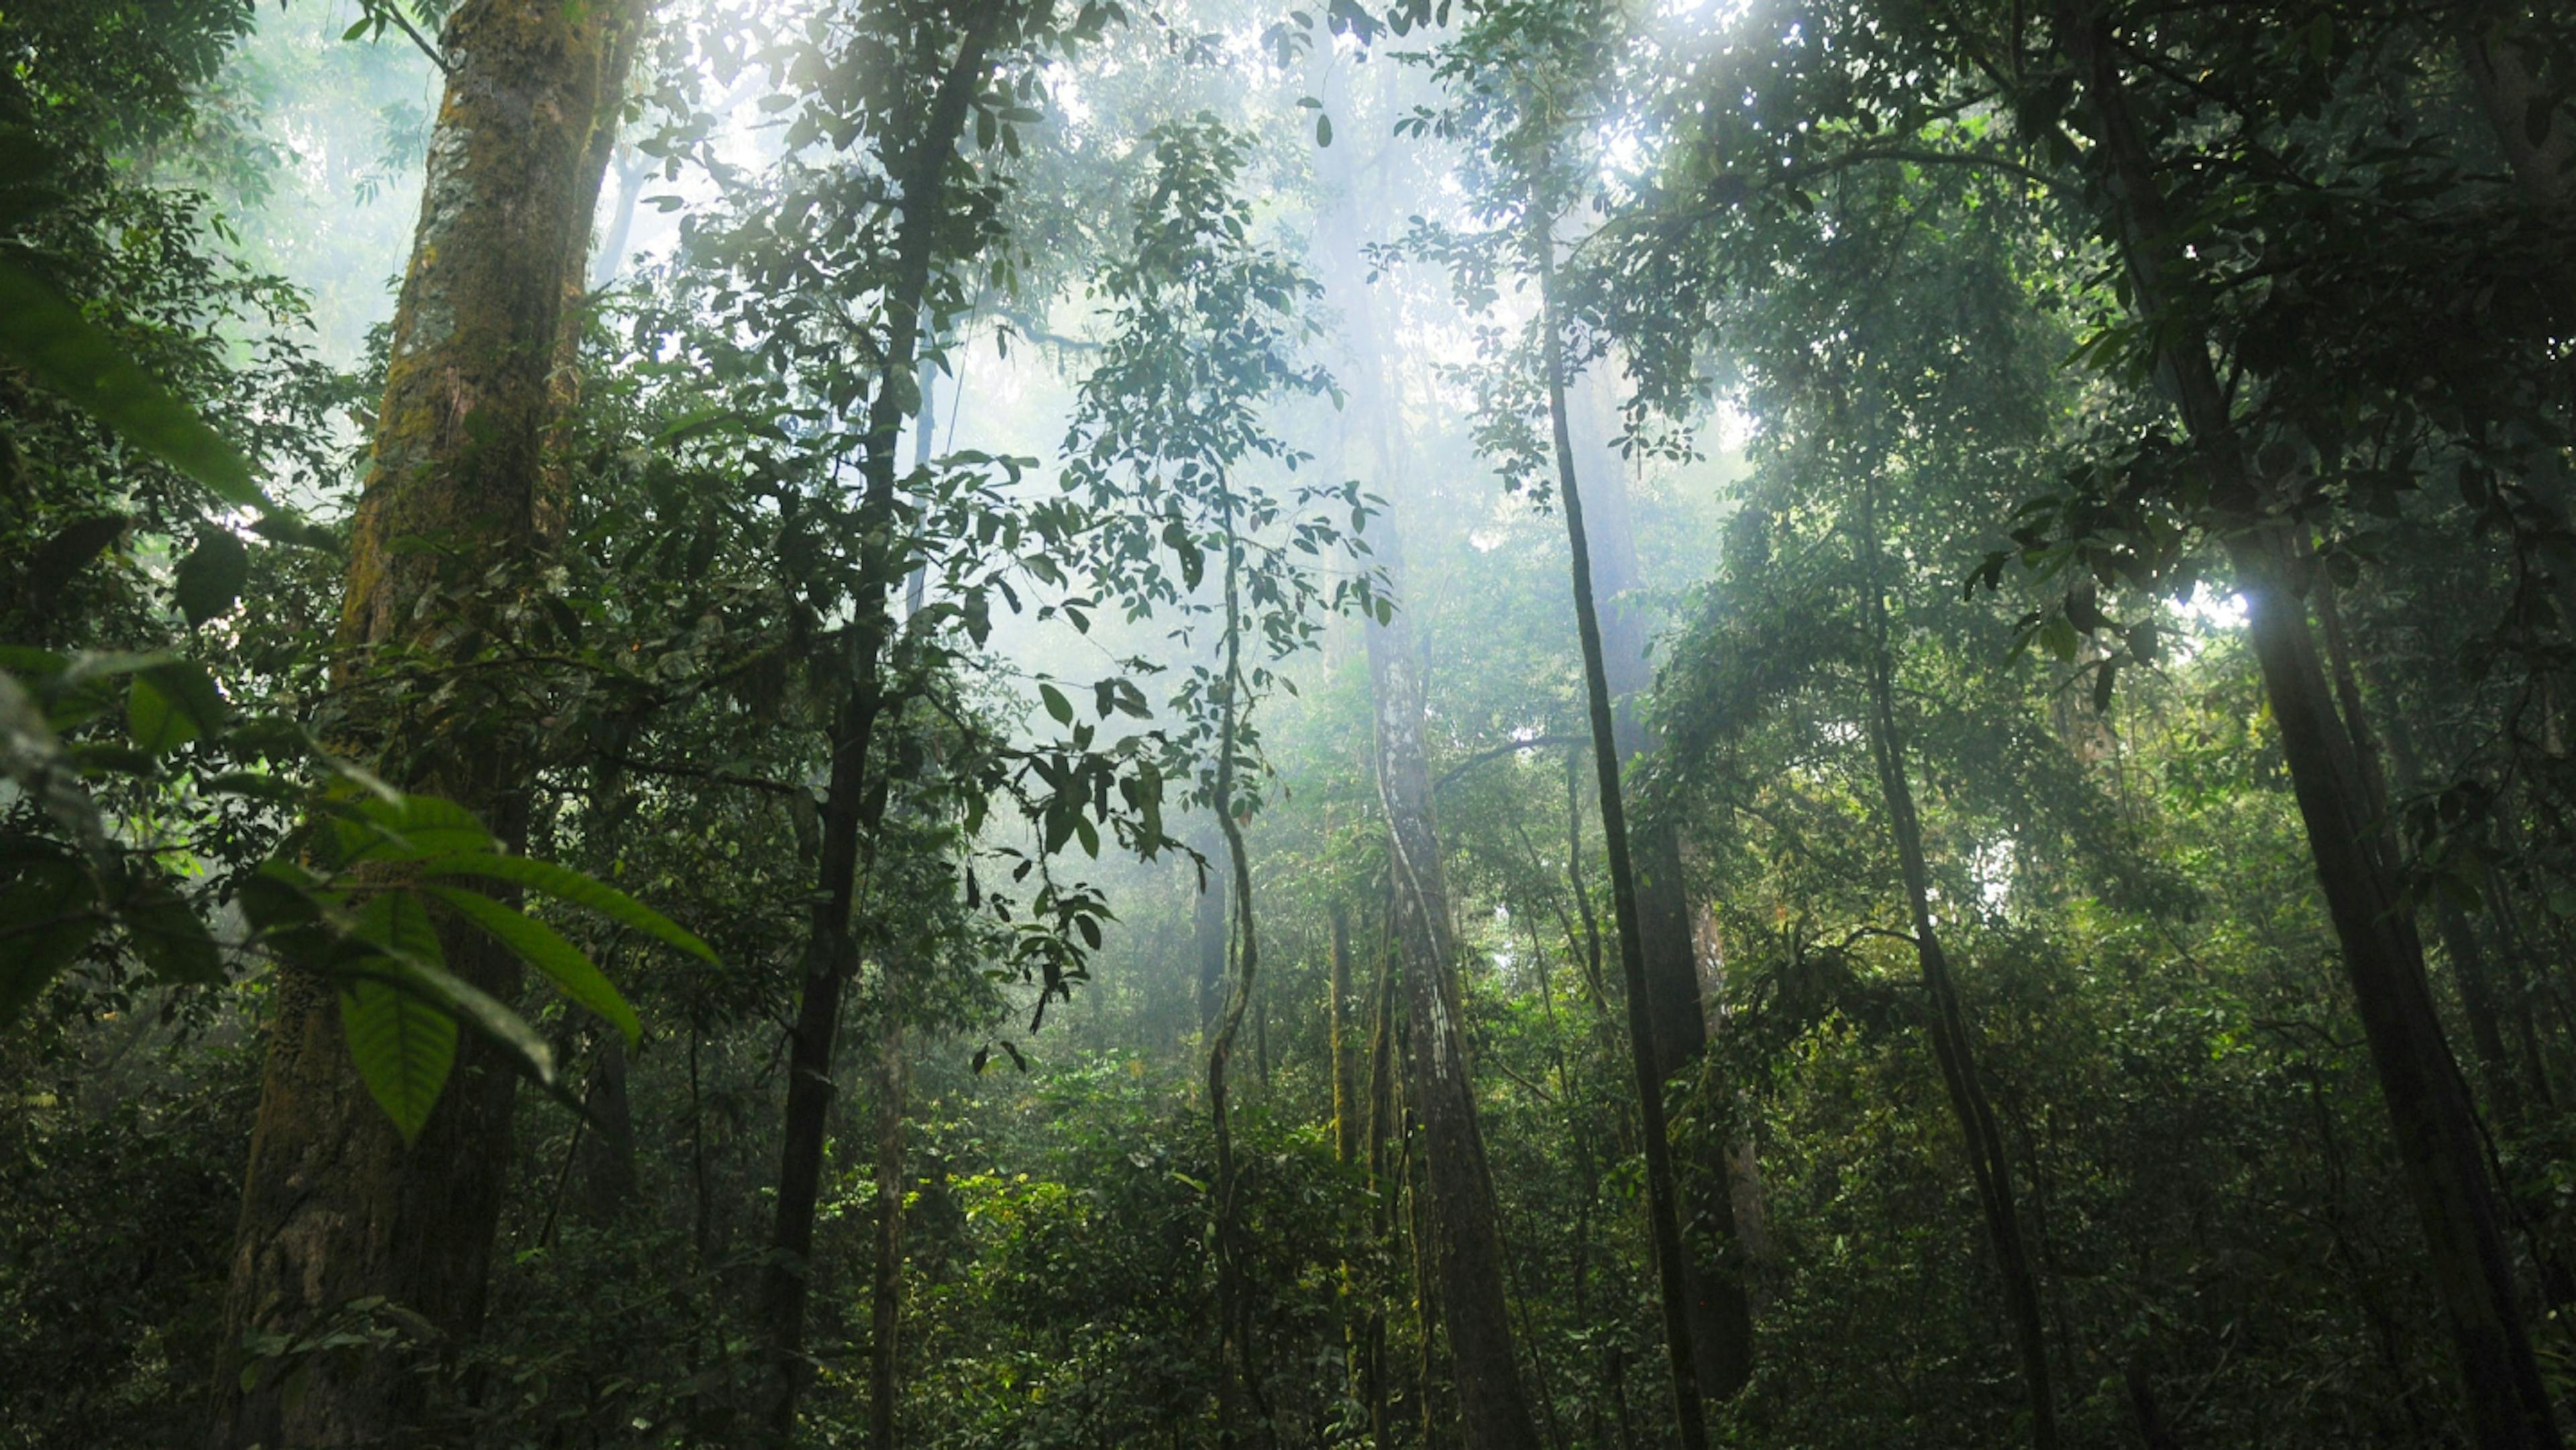 Each tree and plant in the Amazon Rainforest has a unique spirit or personality.